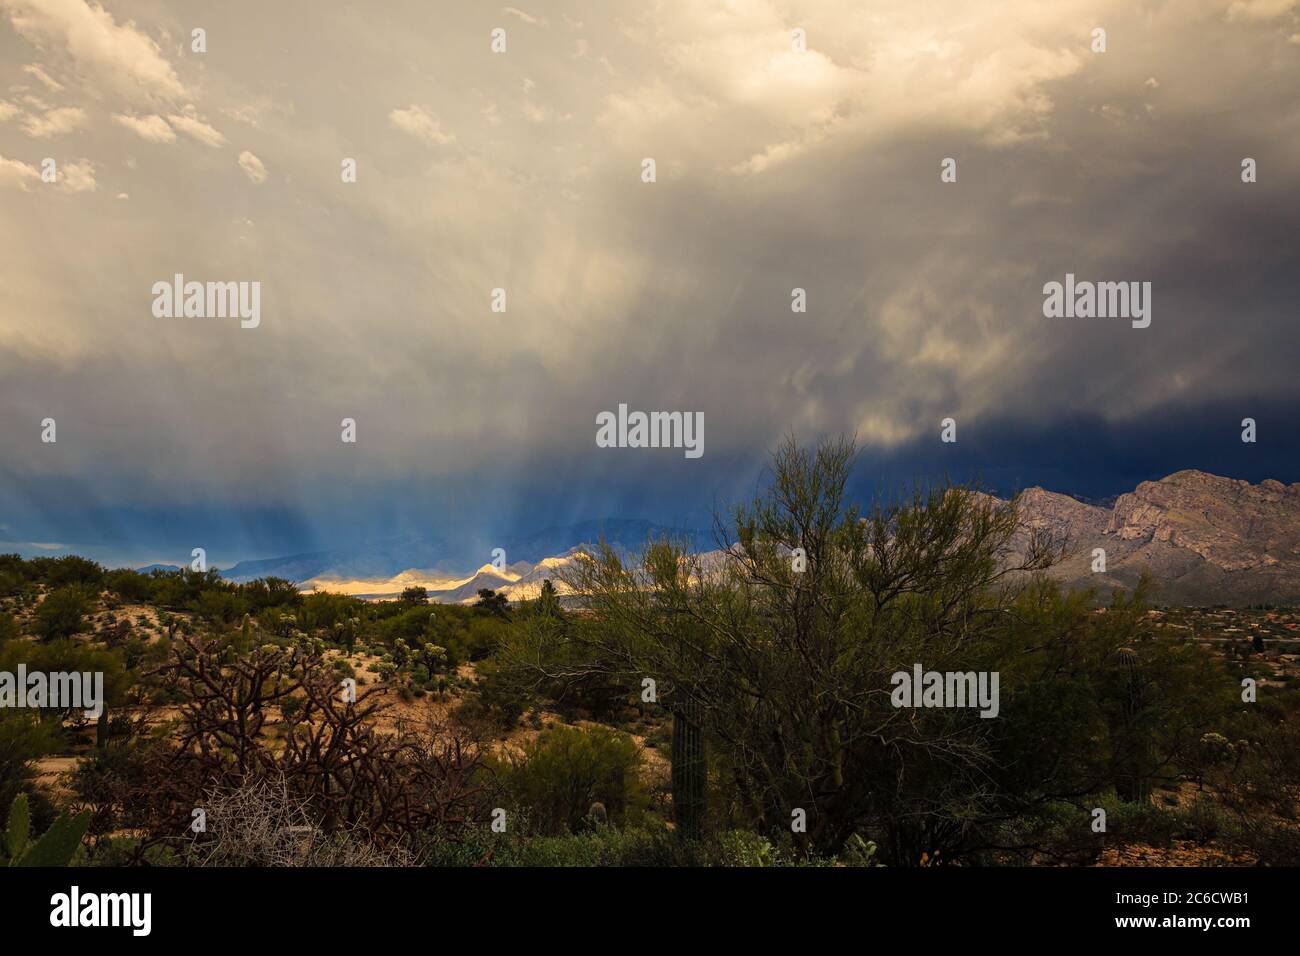 Rays of sunlight filter through the Winter clouds and illuminate the foothills of the Santa Catalina Mountains near Tucson, Arizona. Stock Photo